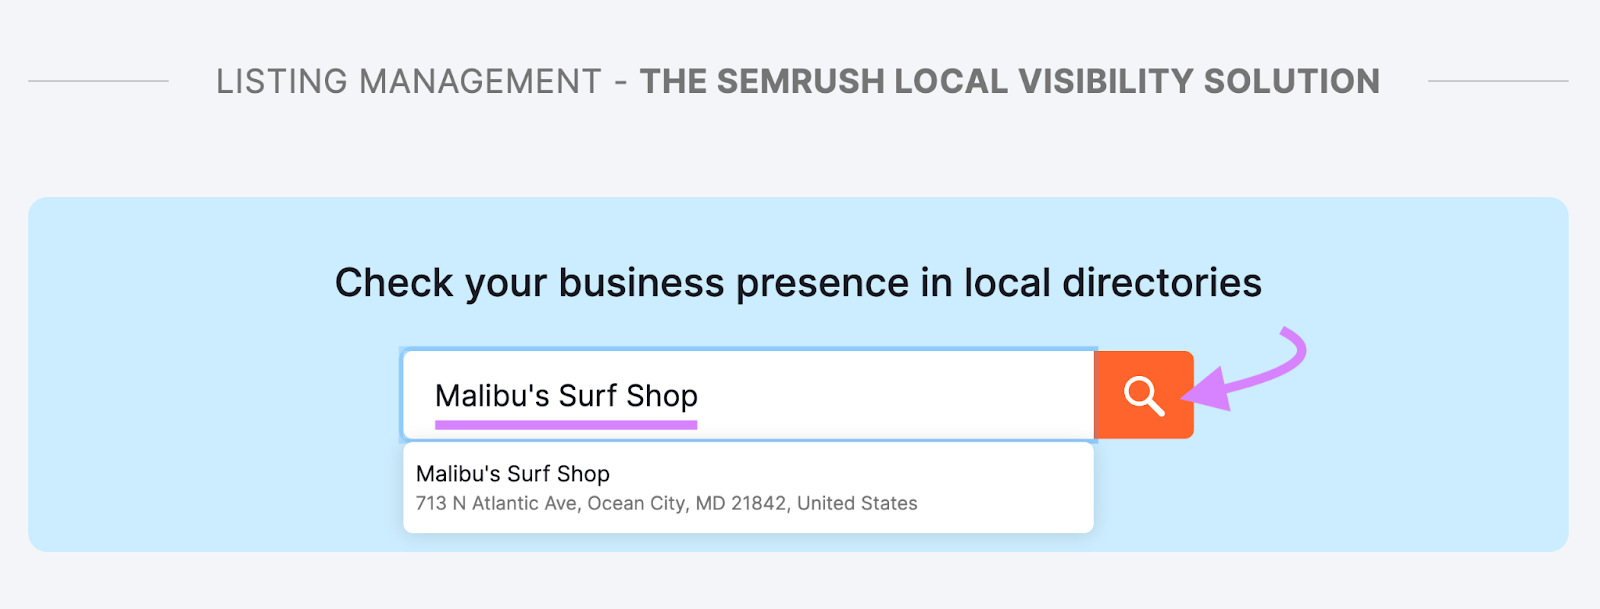 Entering "Malibu's Surf Shop" in the Listing Management tool